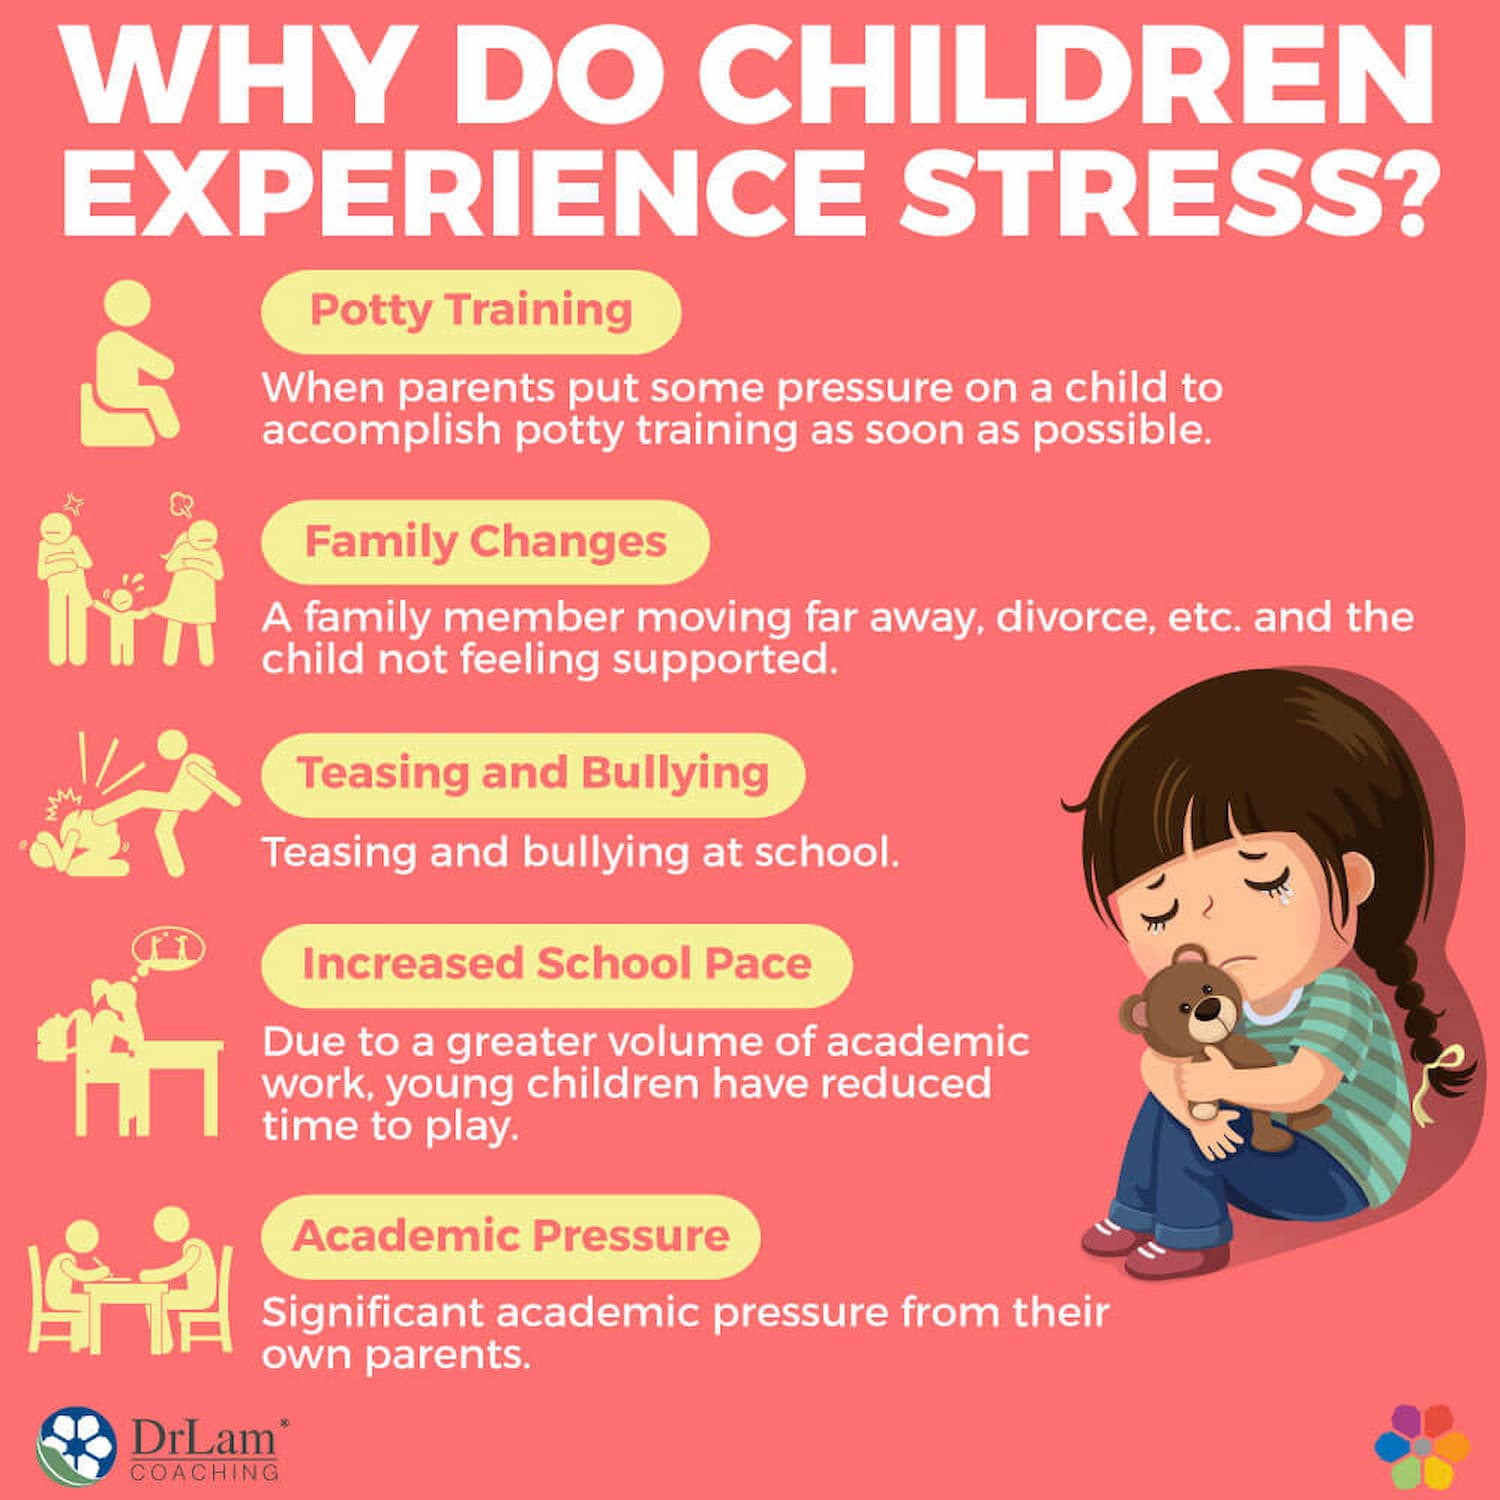 Common causes of childhood stress